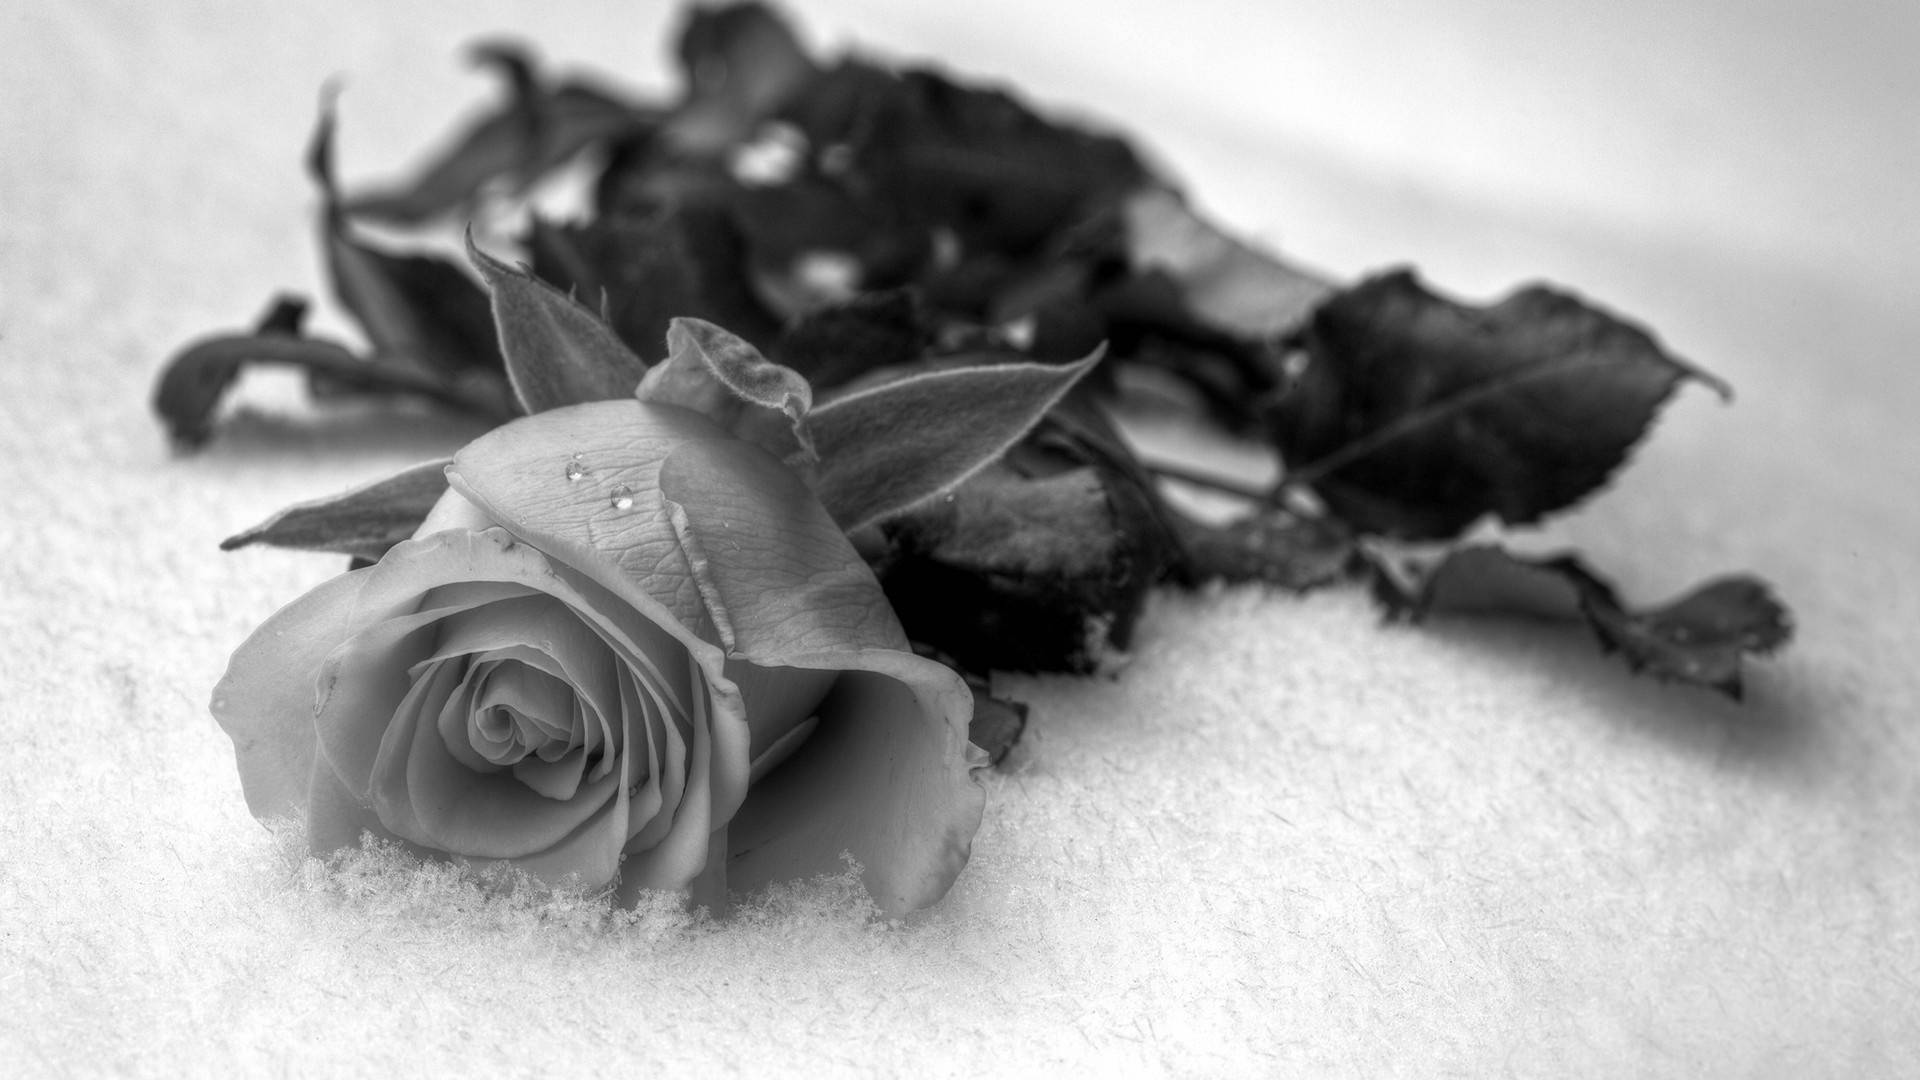 Black And White Rose On Fabric Background